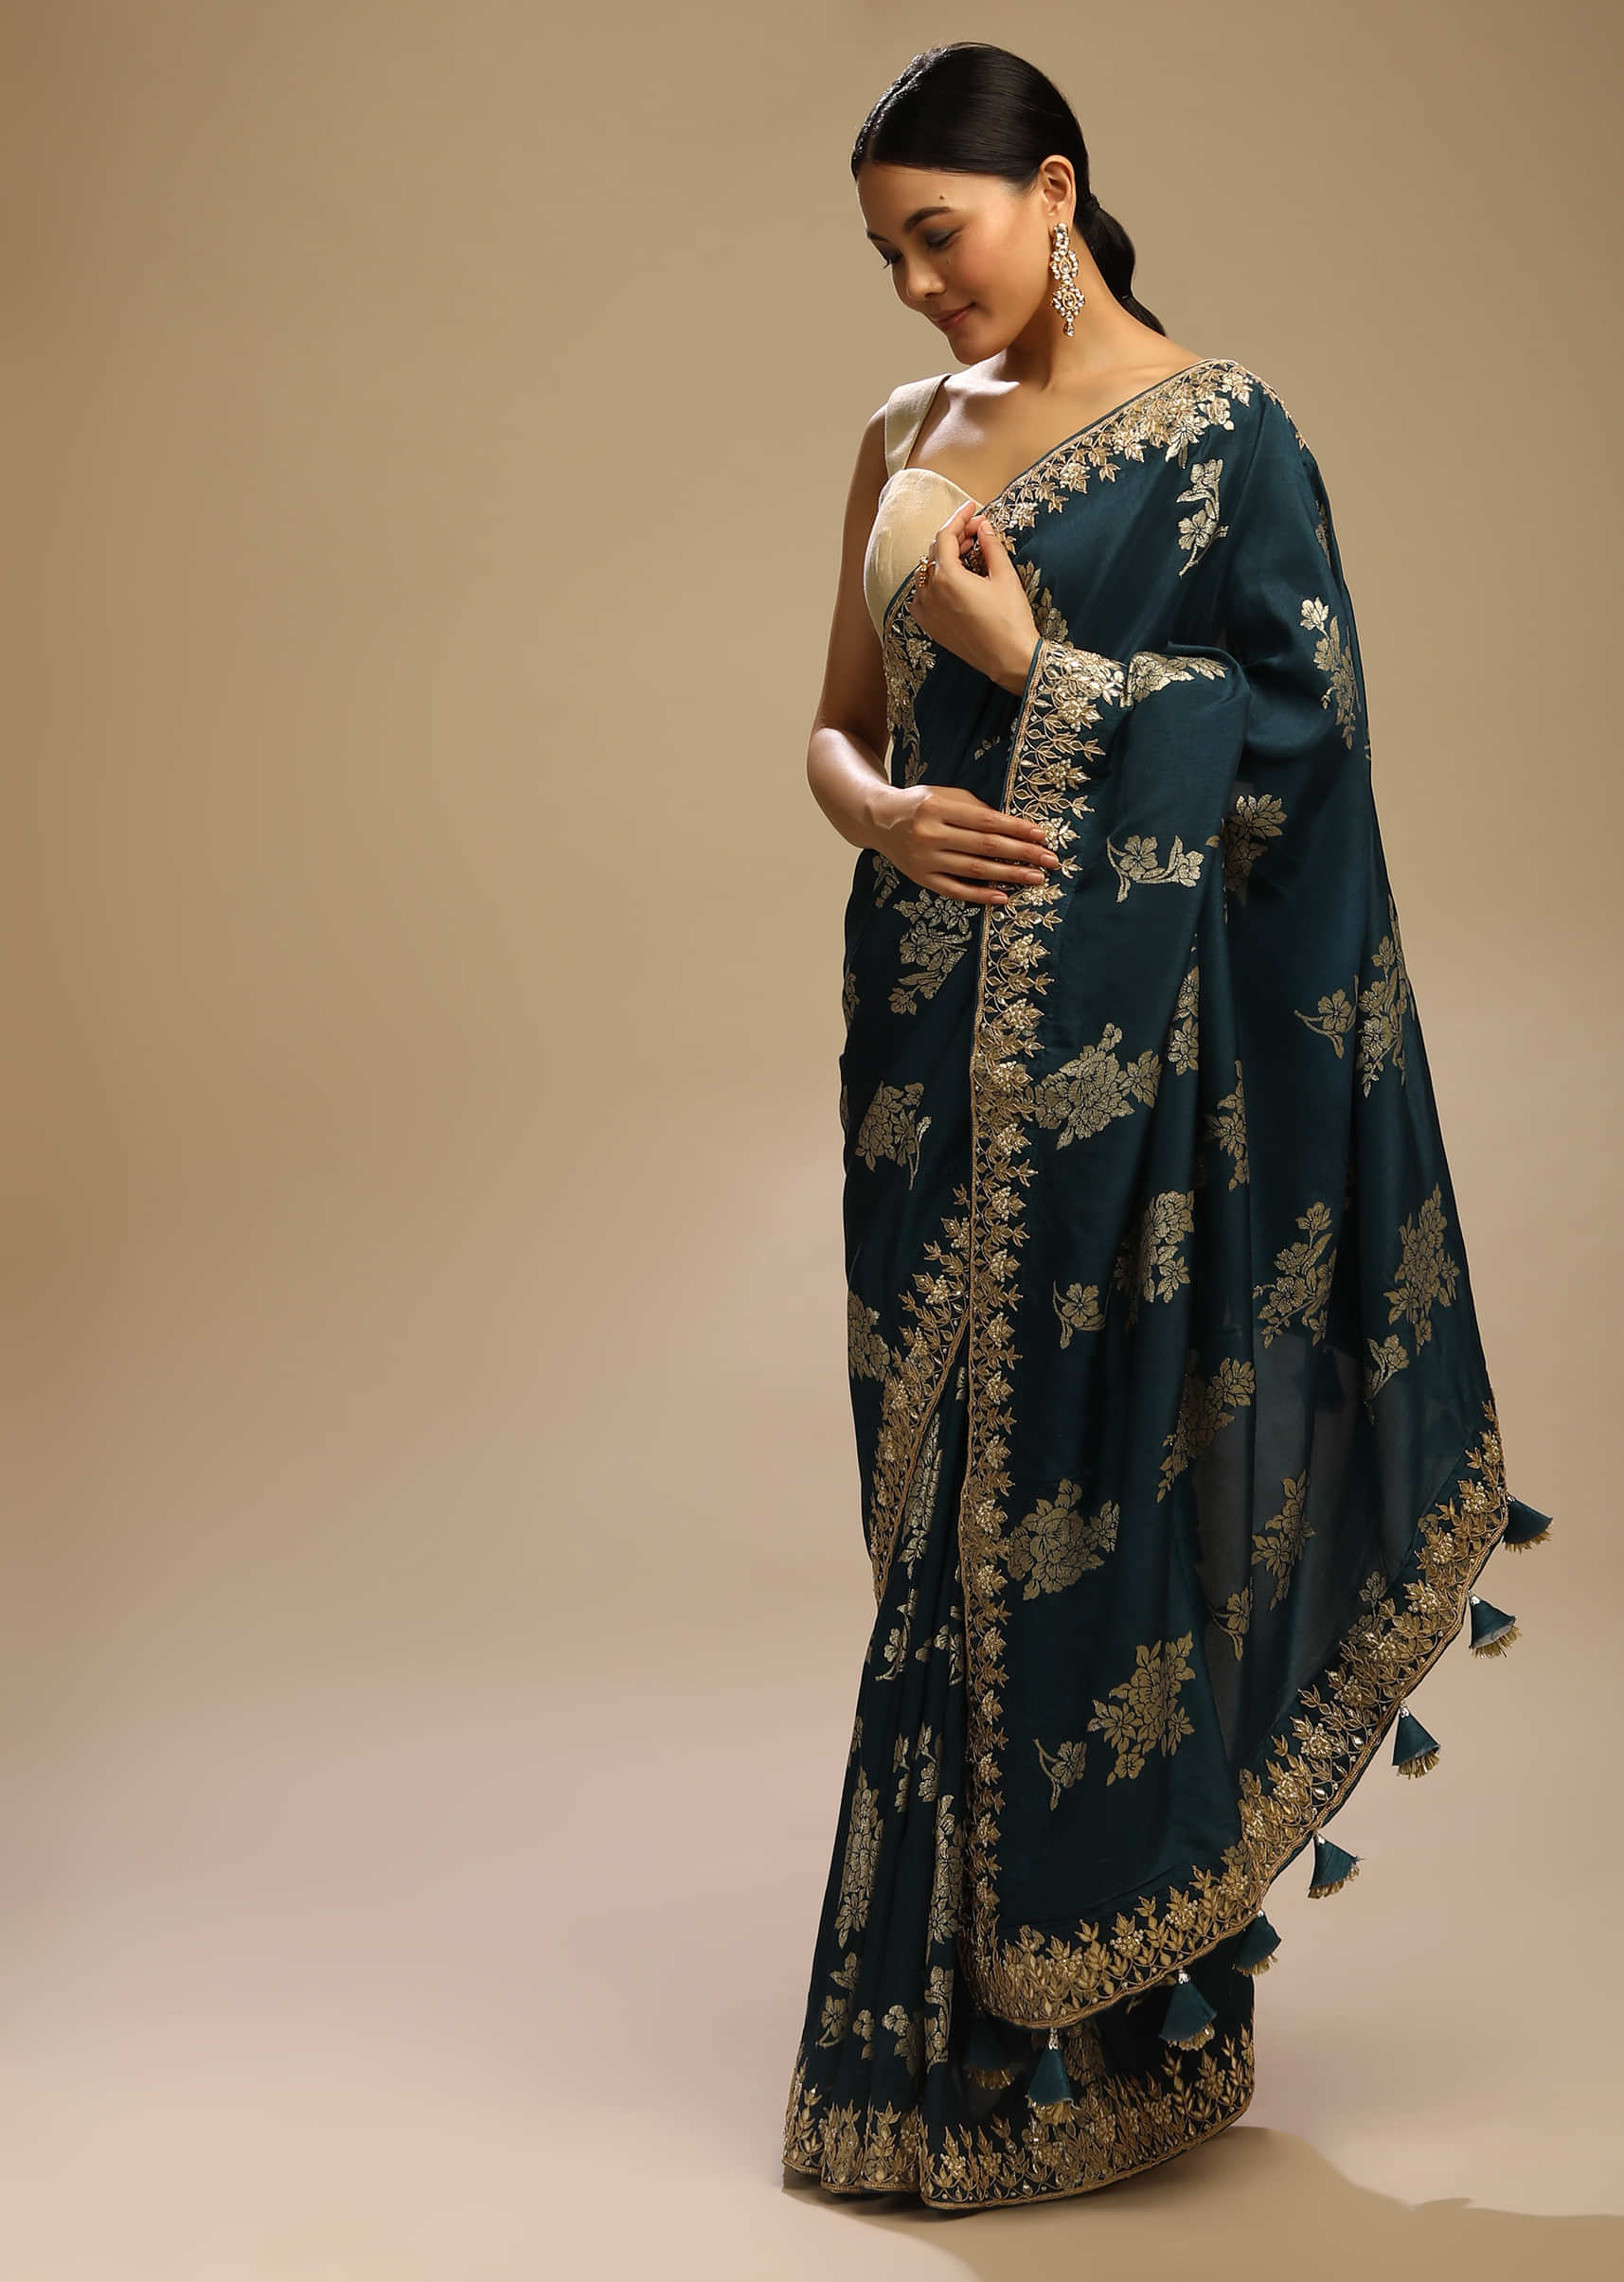 Peacock Blue Saree In Dupion Silk With Woven Floral Motifs And Gotta Embroidered Floral Border